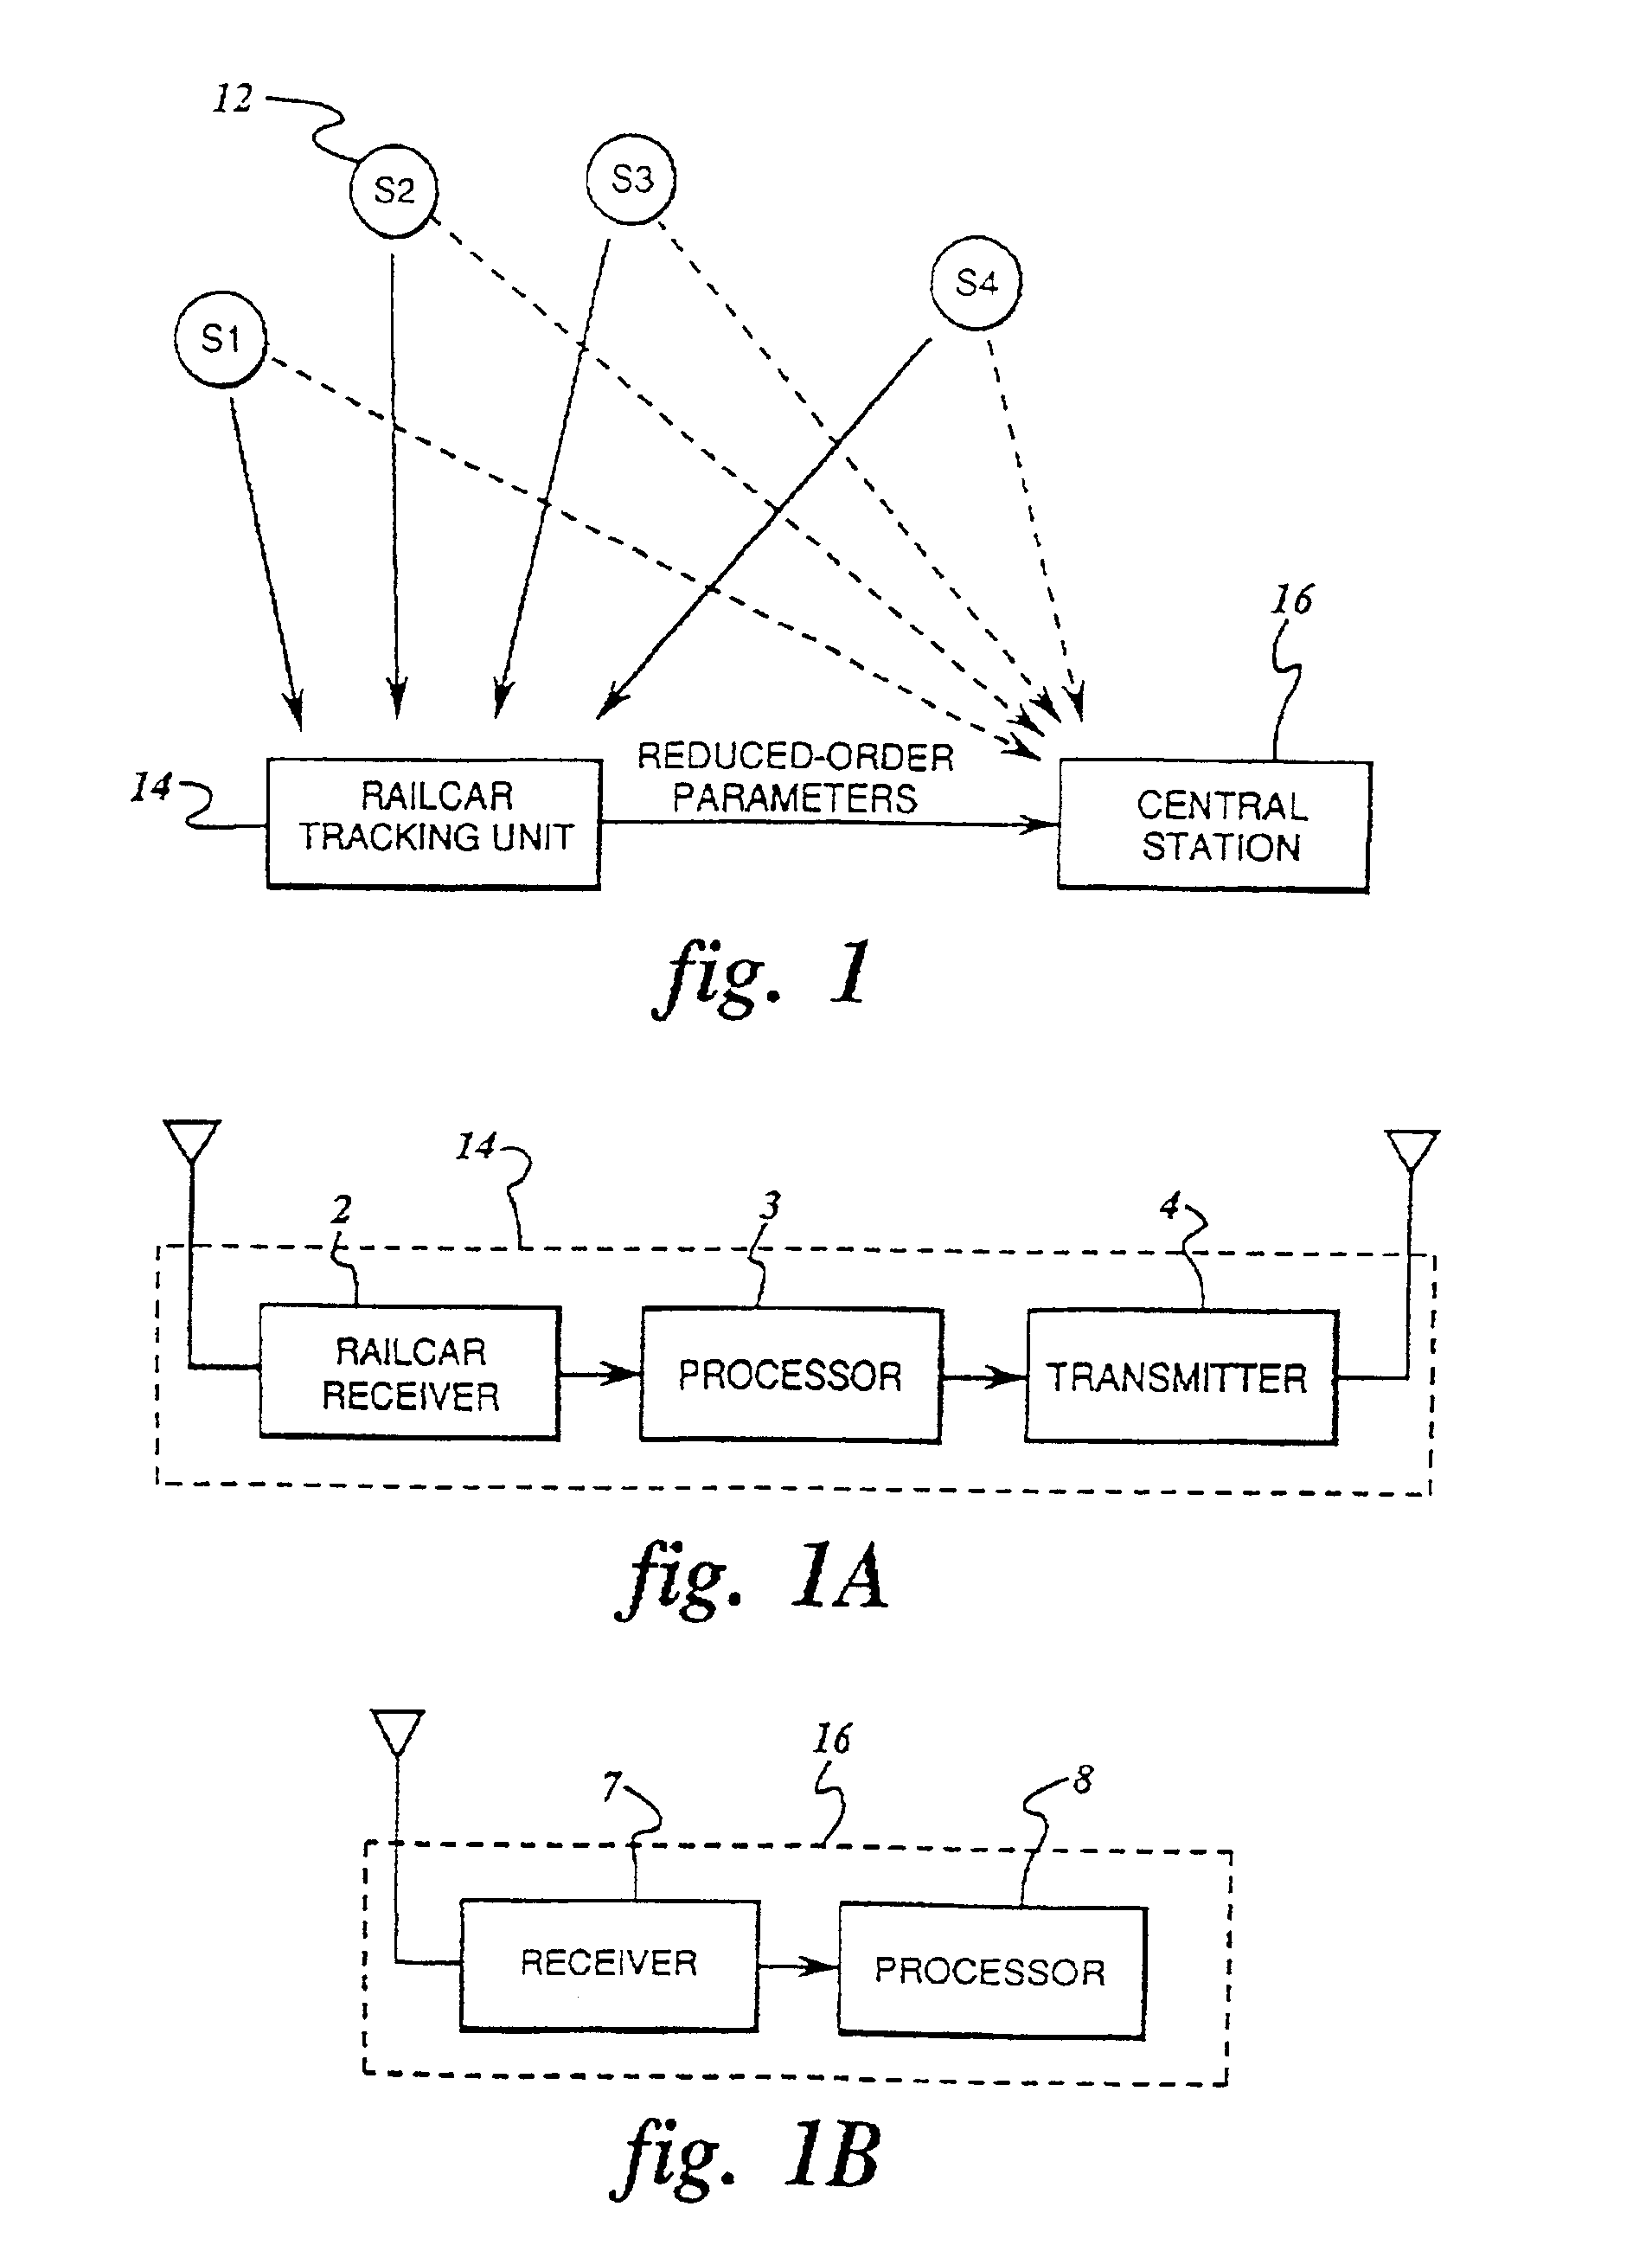 Reduced-power GPS-based system for tracking multiple objects from a central location